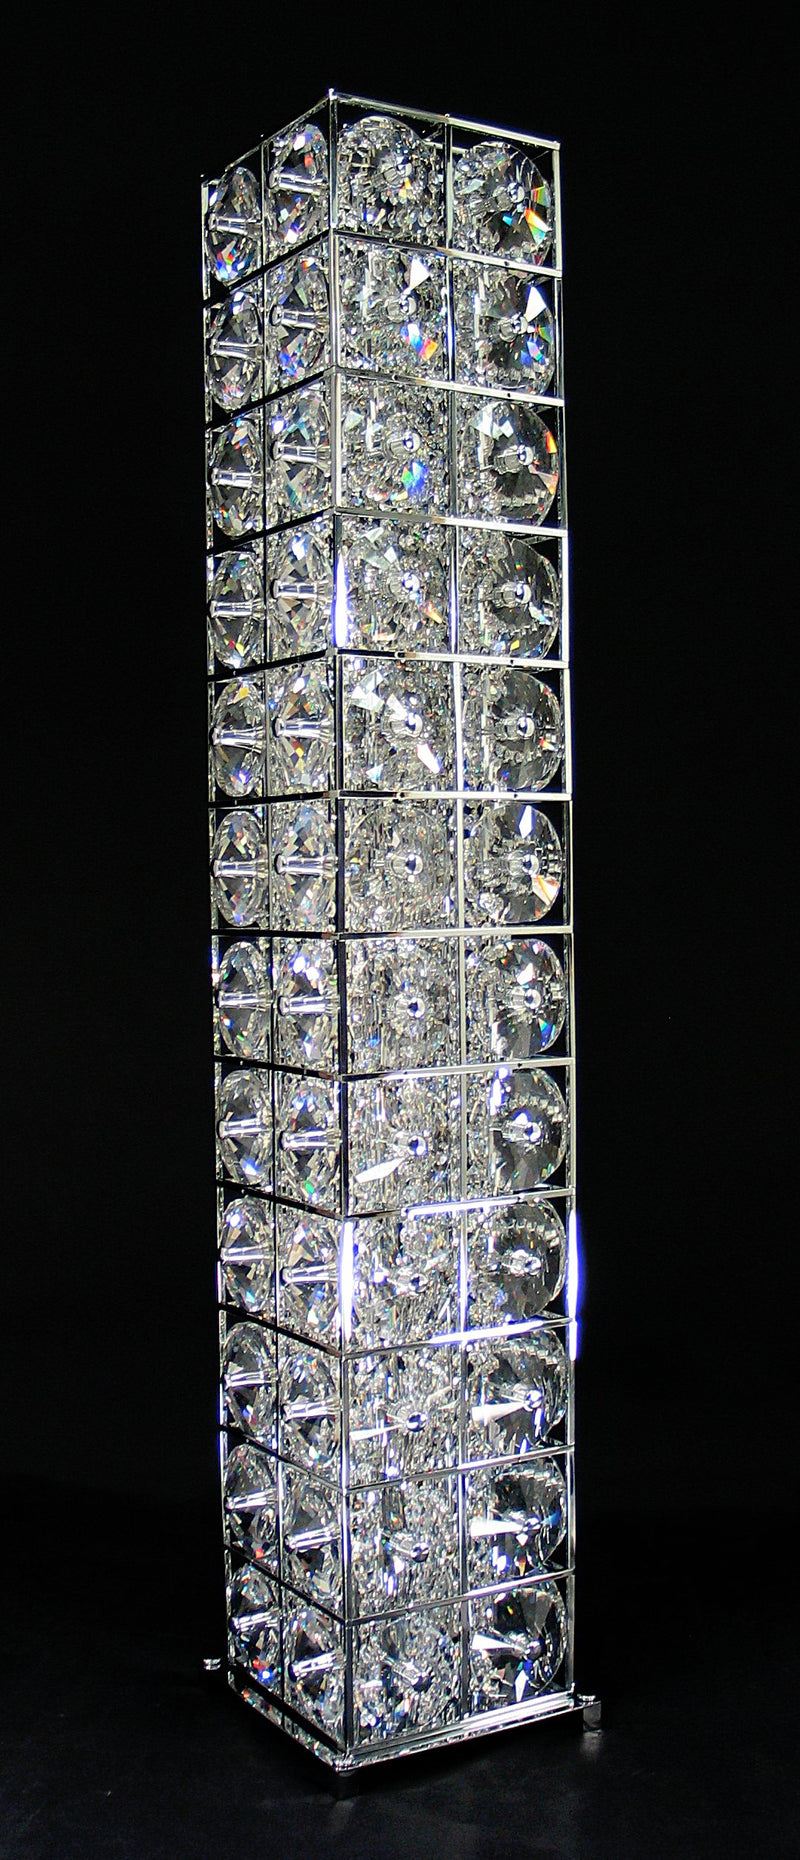 48 Crystal Floor Lamp - 9" Square 12 Light - Asfour Crystal [ST-48-9"x9"-1038-96]